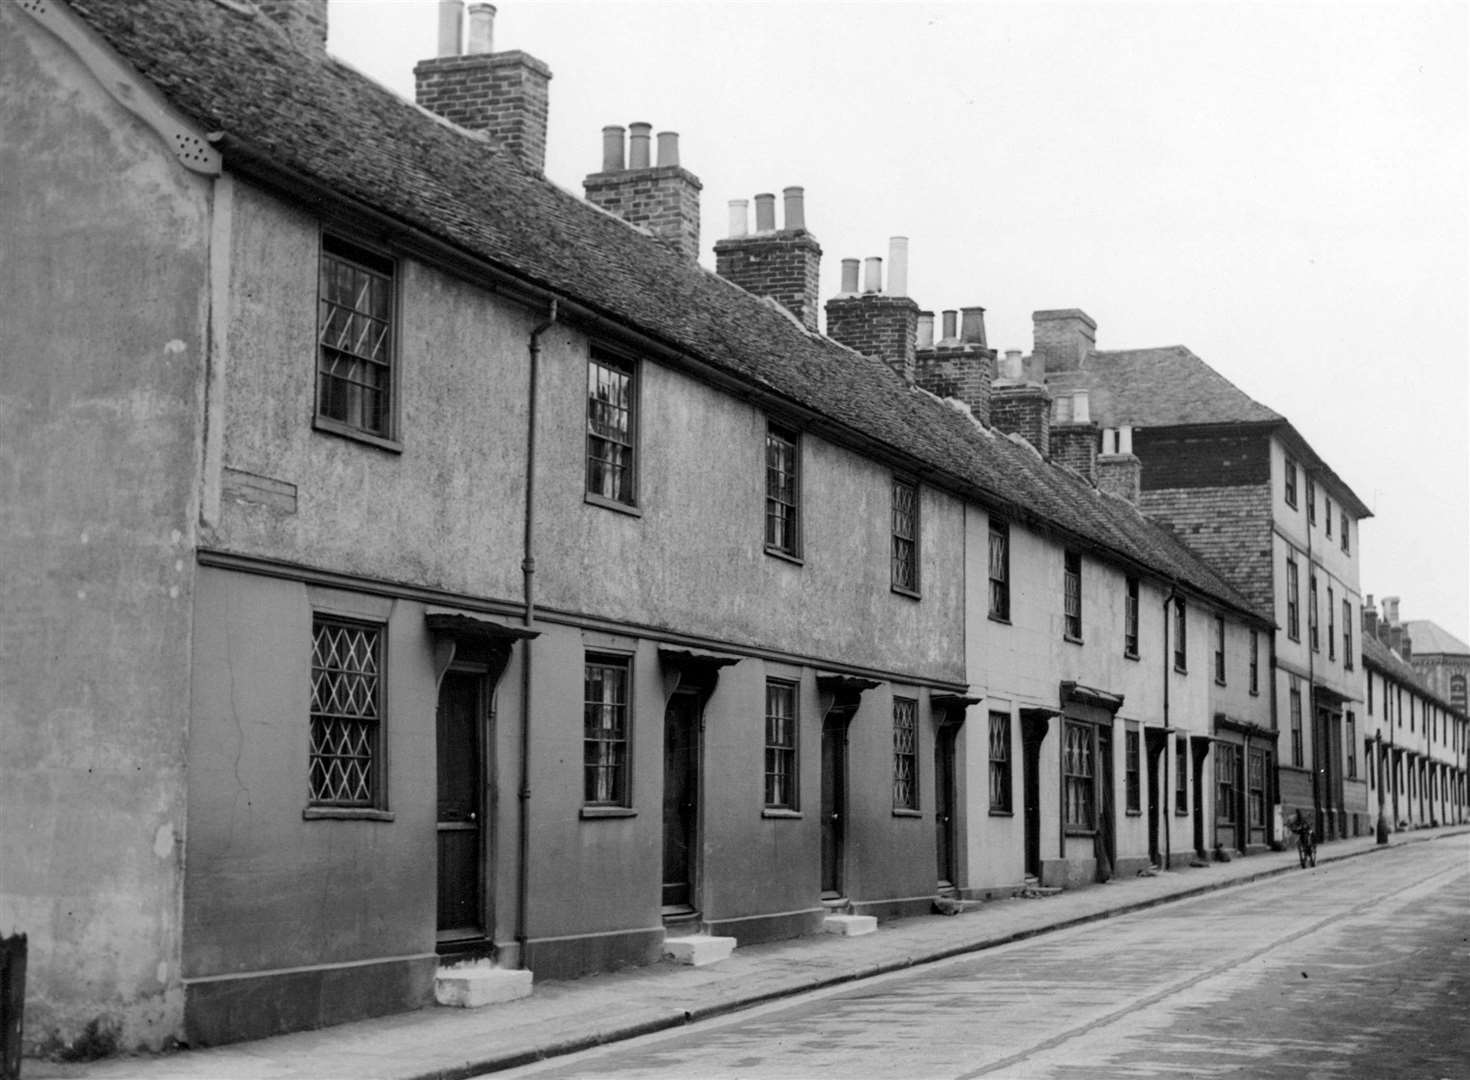 Hempsted Street, 1941. It survived all wars, but Hempsted Street did not survive the ‘war on heritage’. A much loved and long-lost street with two public houses and numerous buildings as well as residential abodes, Hempsted Street is still very much a talking point among local residents. Many either lived there or certainly knew someone that did. It made way for today’s County Square which was originally called The Tufton Centre